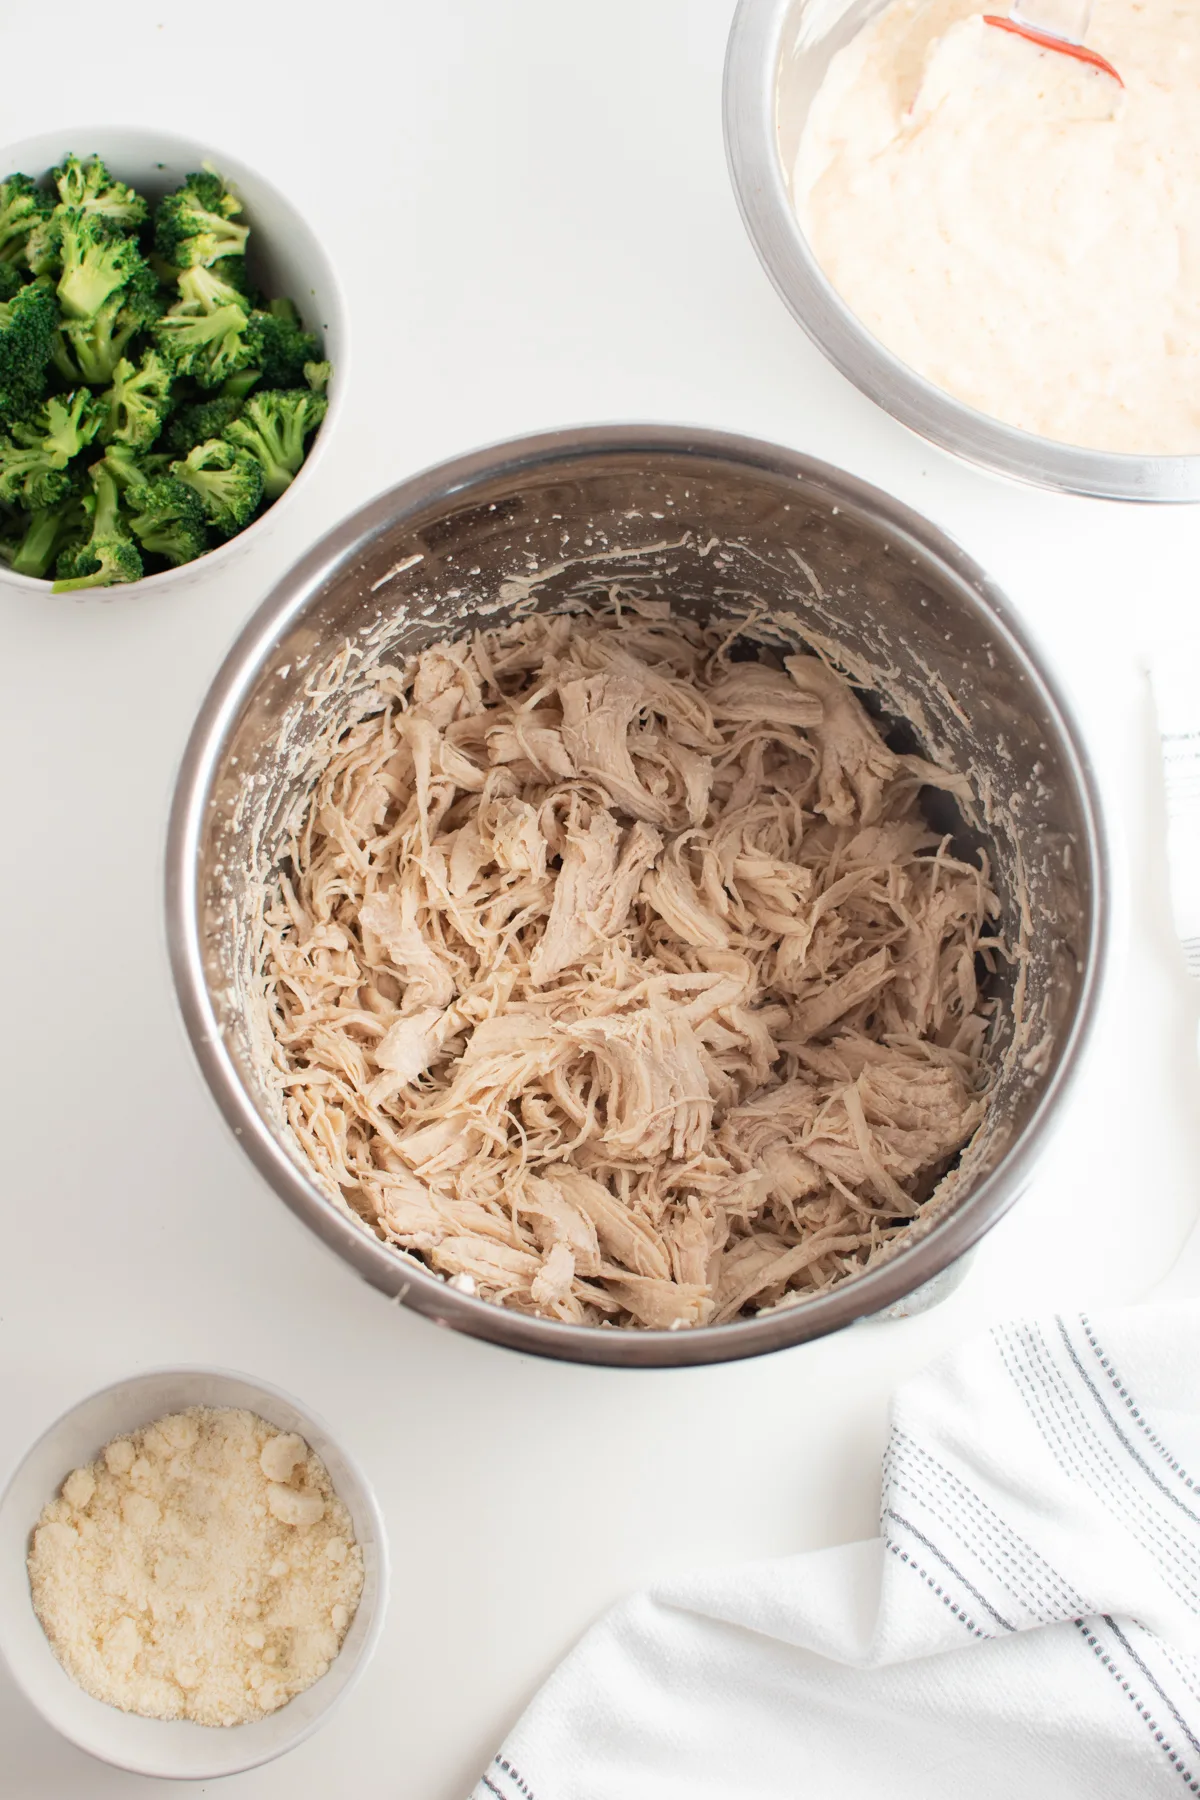 Shredded chicken in large metal mixing bowl surrounded ingredients in prep bowls.